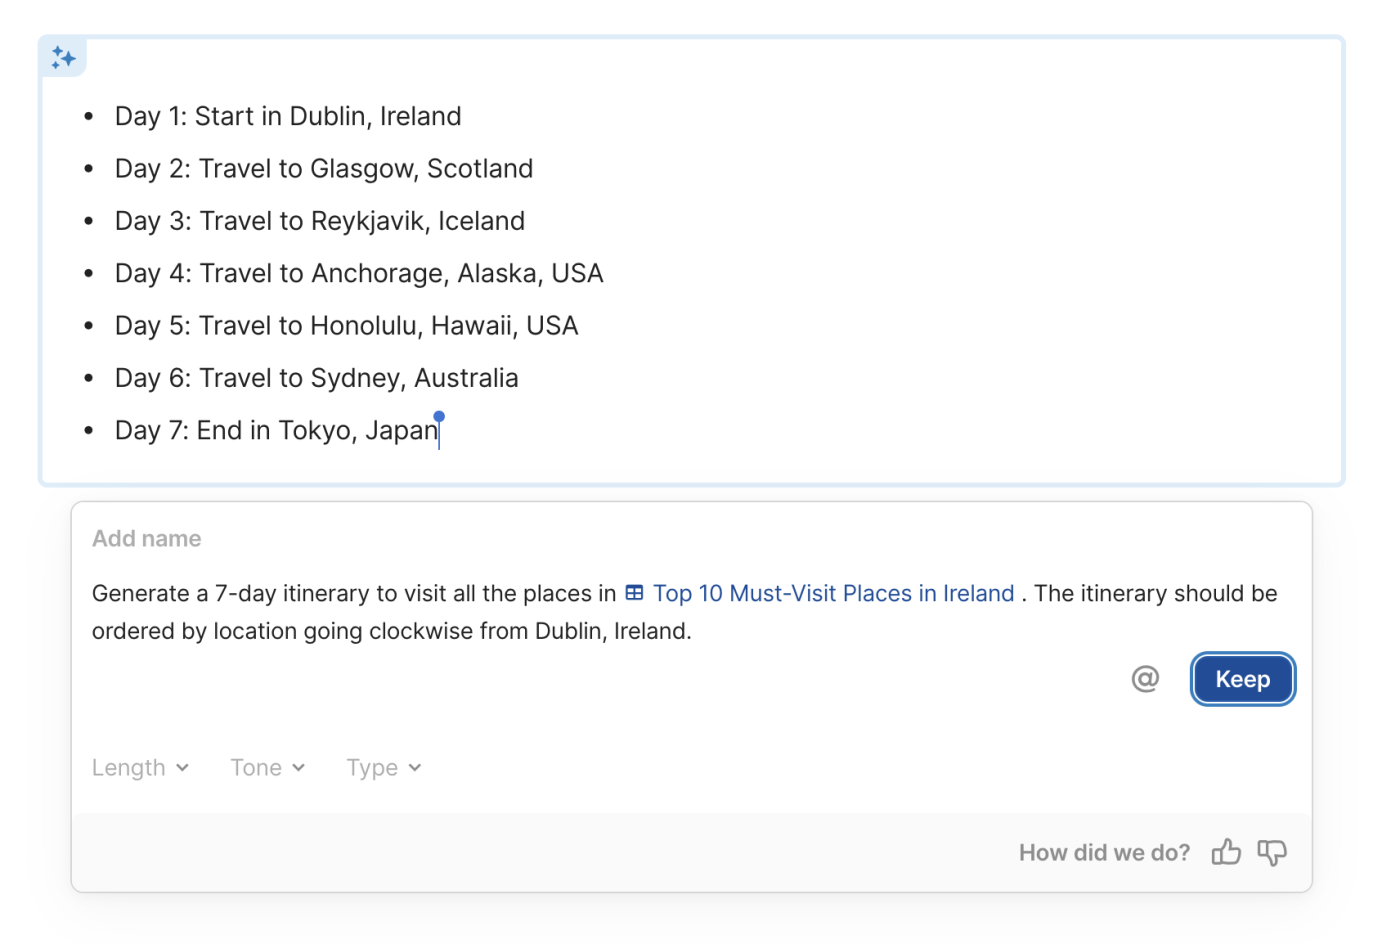 Coda AI-generated seven-day itinerary to visit all the places in the table Top 10 Must-Visit Places in Ireland. The AI-generated result shows an itinerary of different countries, including Ireland, Scotland, Iceland, USA, Australia, and Japan.